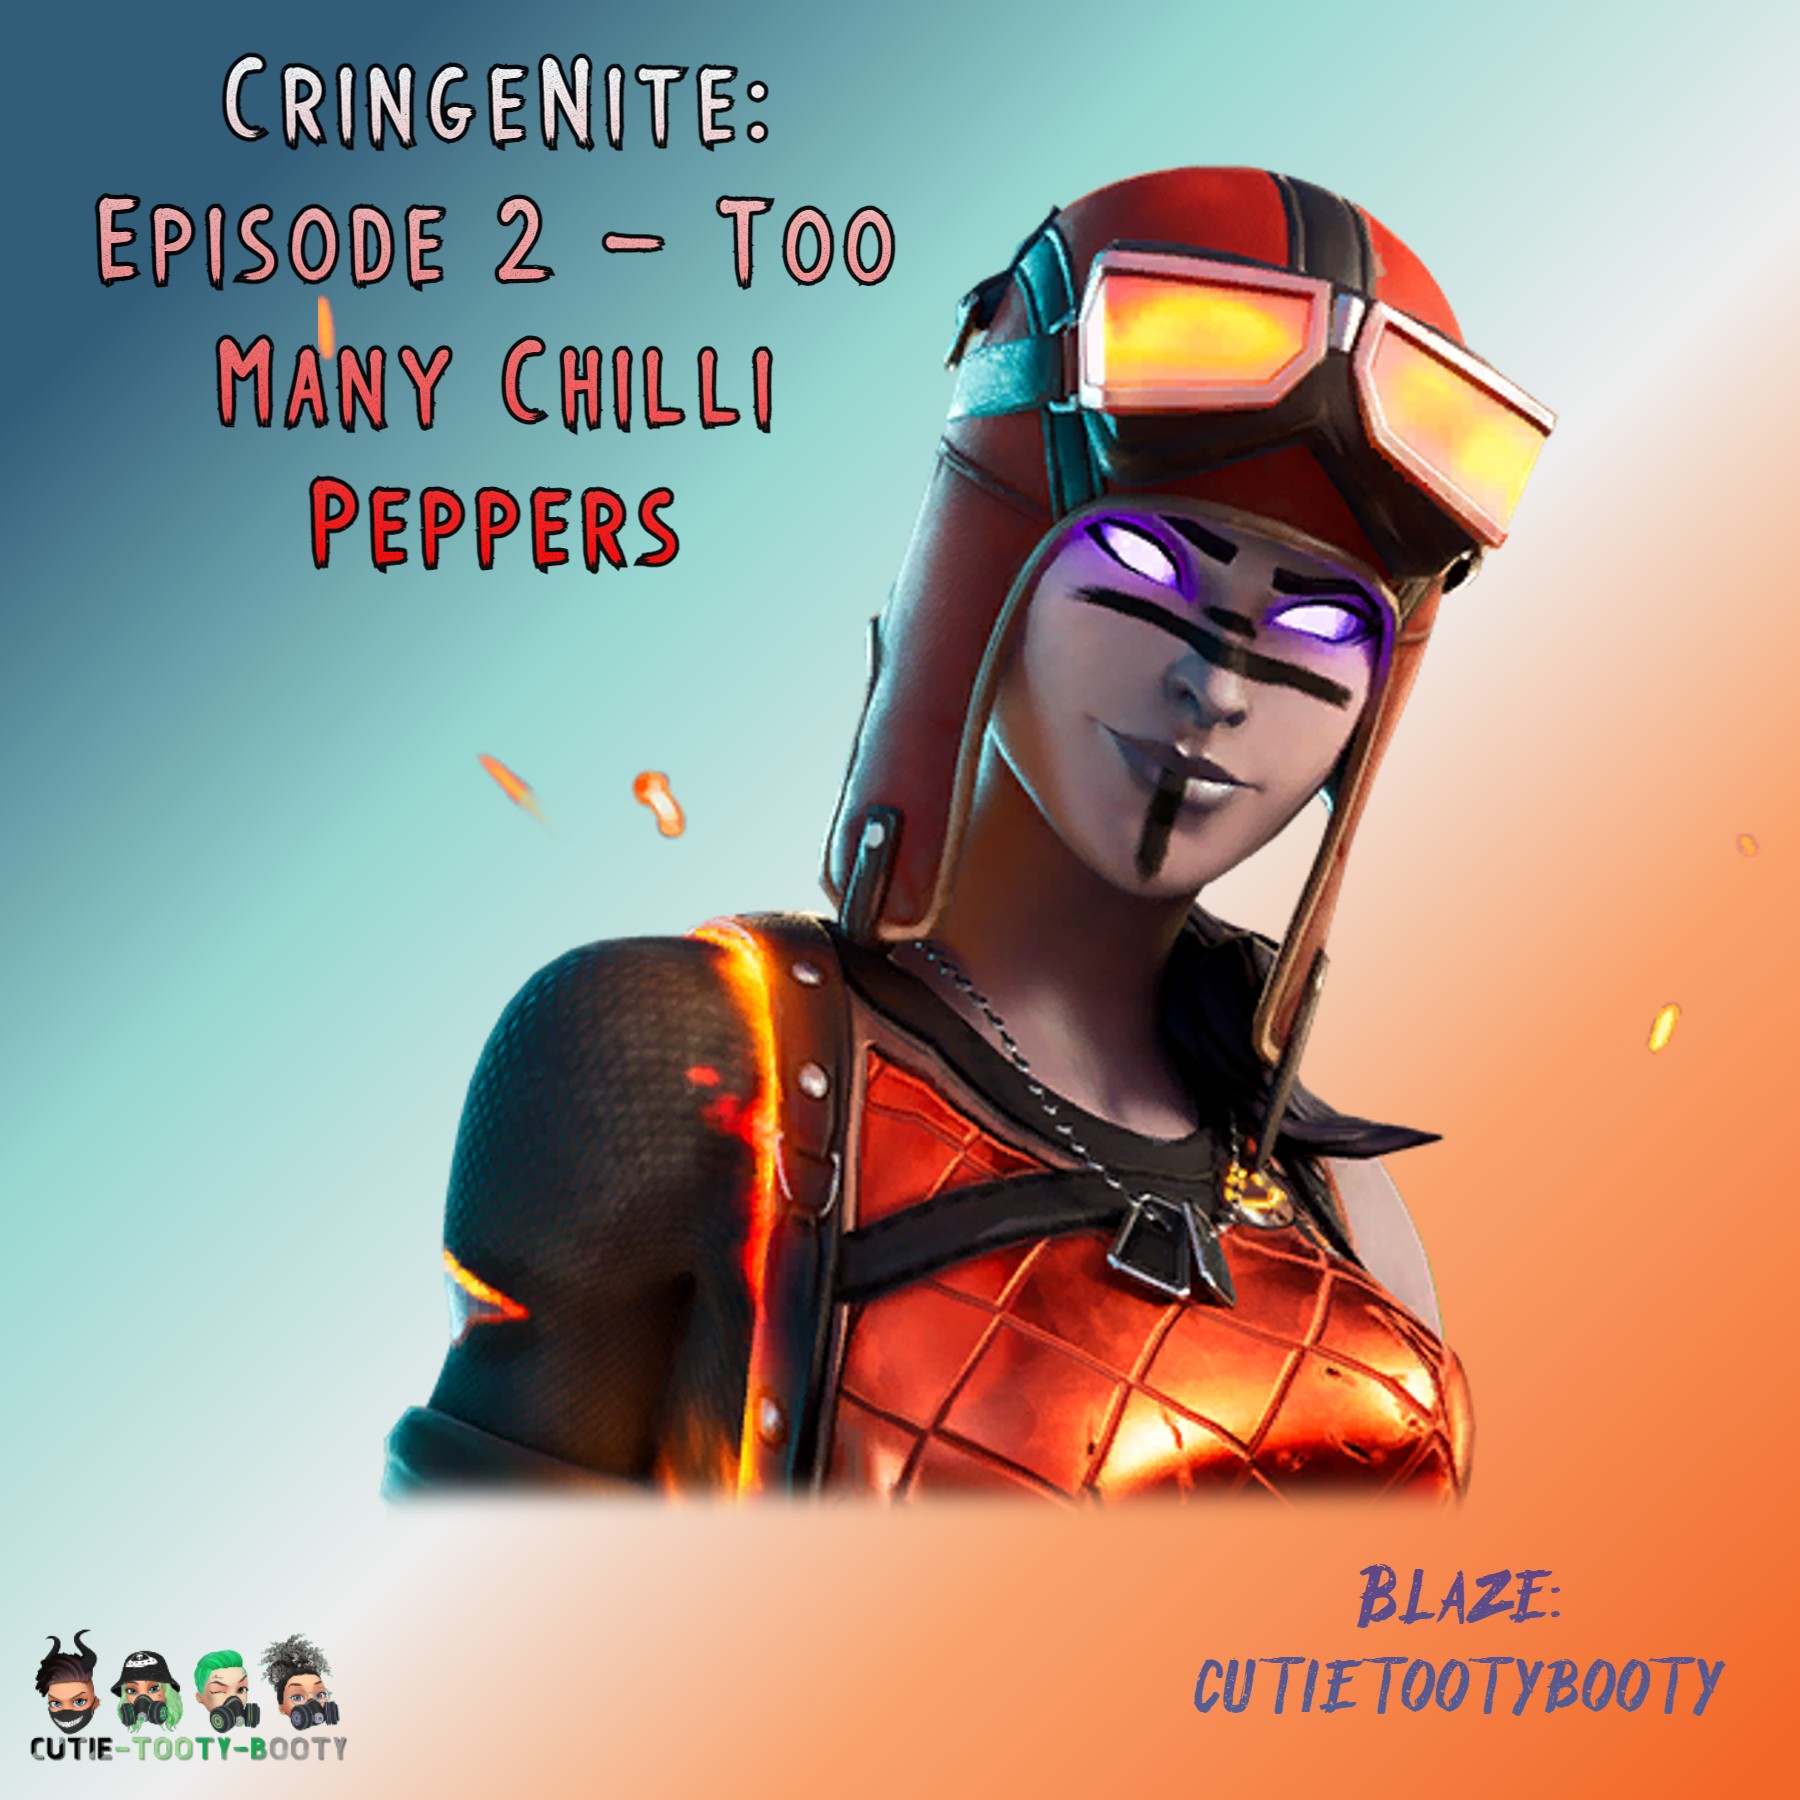 CringeNite: Episode 2 - Too Many Chilli Peppers